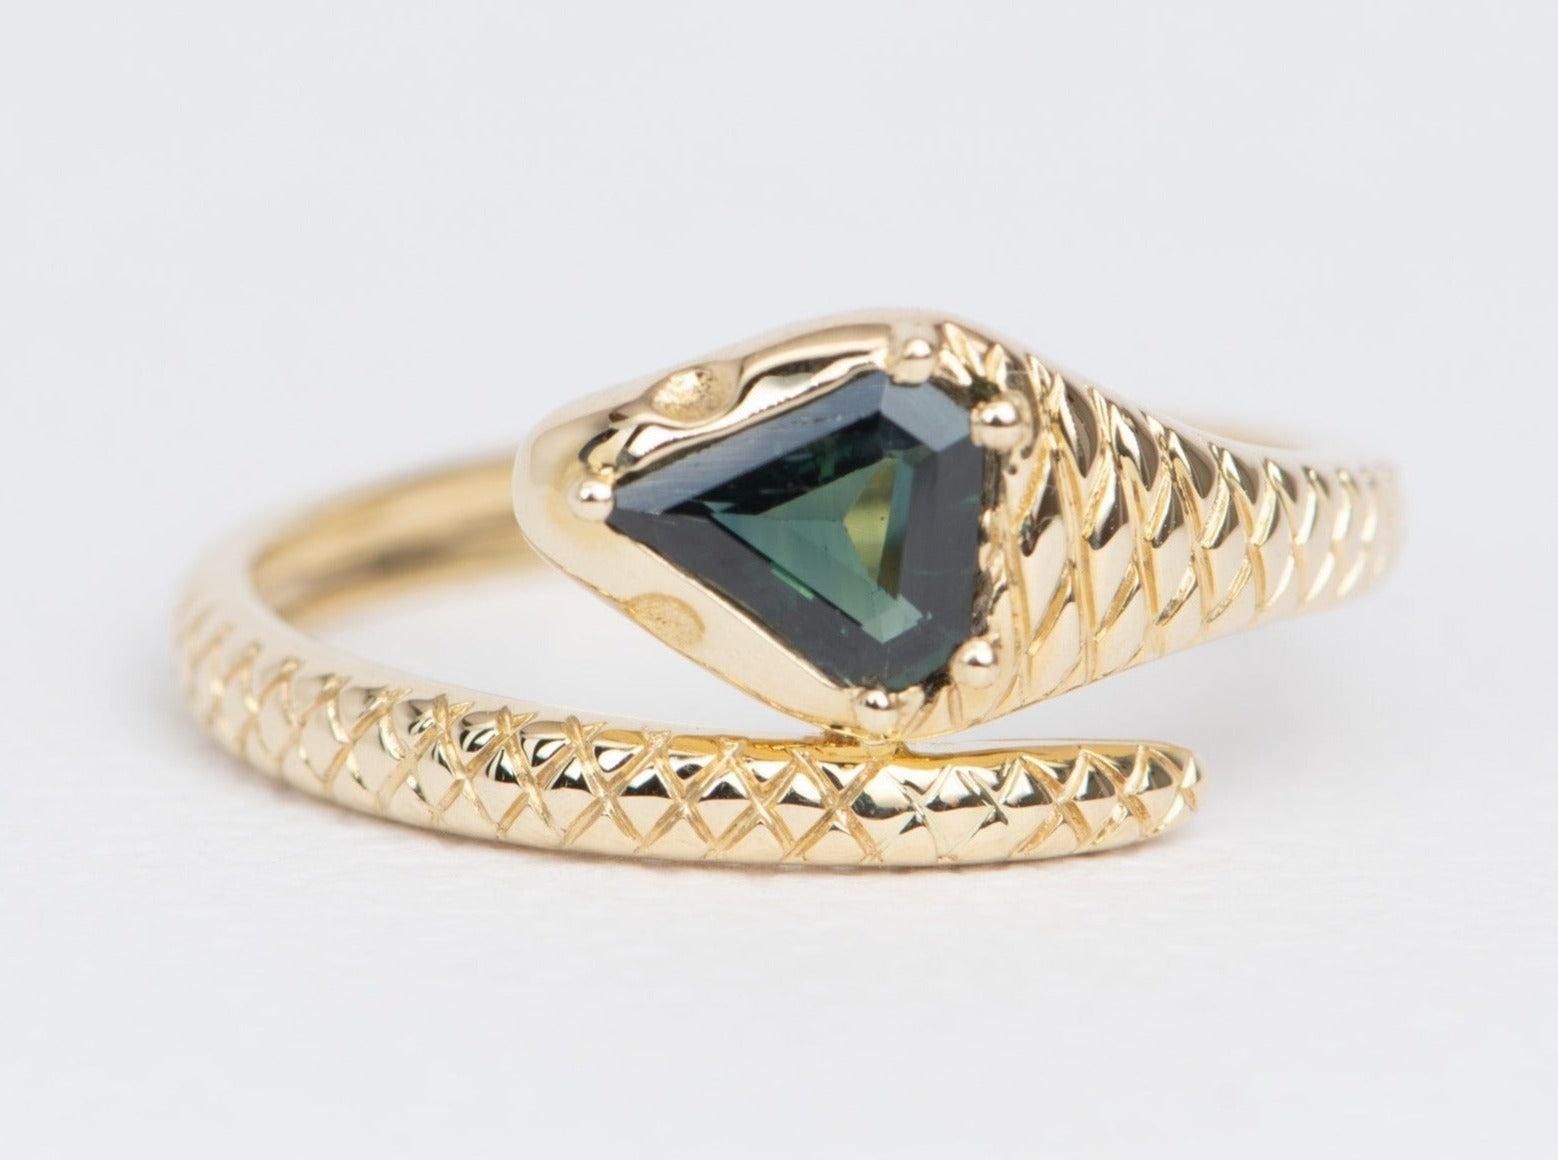 ♥ Solid 14k yellow gold serpent coil textured ring set with a beautiful kite-shaped teal sapphire
♥ Gorgeous blue green color!
♥ The item measures 9.1 mm in length, 11.7 mm in width, and stands 3.1 mm from the finger

 

♥ US Size 7 (Free resizing